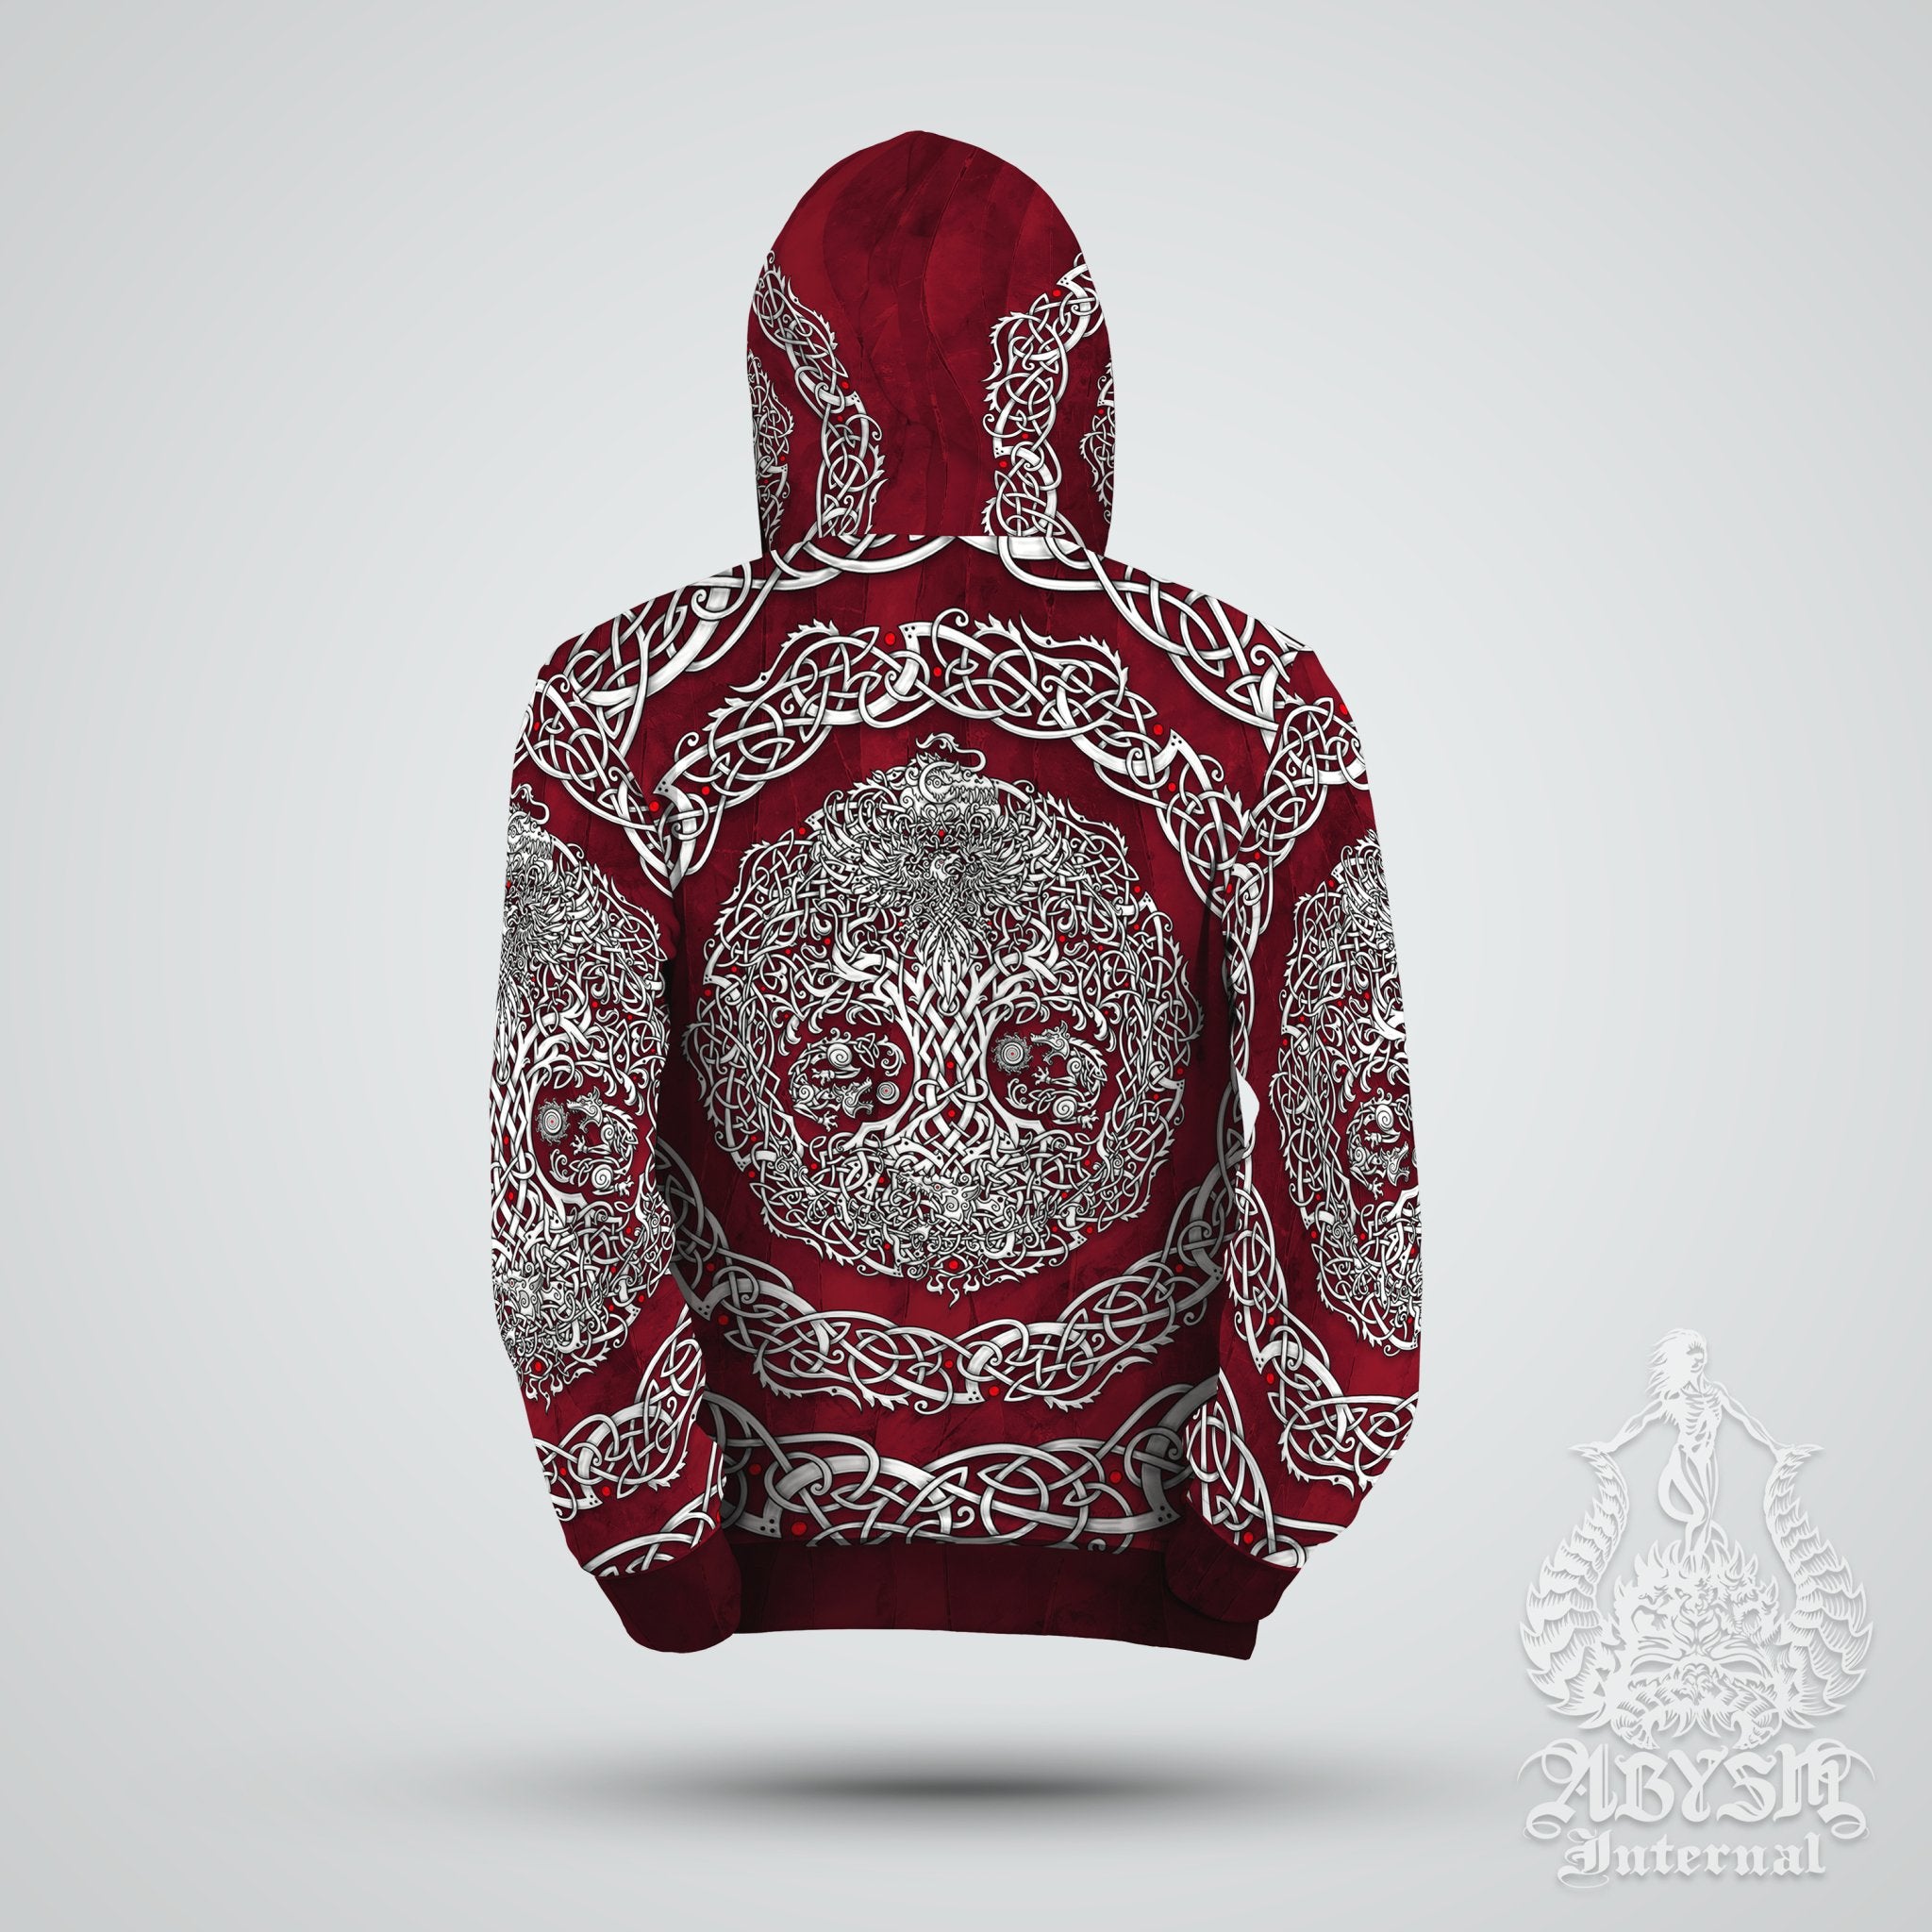 Yggdrasil Sweater, Viking Hoodie, Norse Street Outfit, Tree of Life Streetwear, Alternative Clothing, Unisex - White and Black, Blue or Red, 3 Colors - Abysm Internal